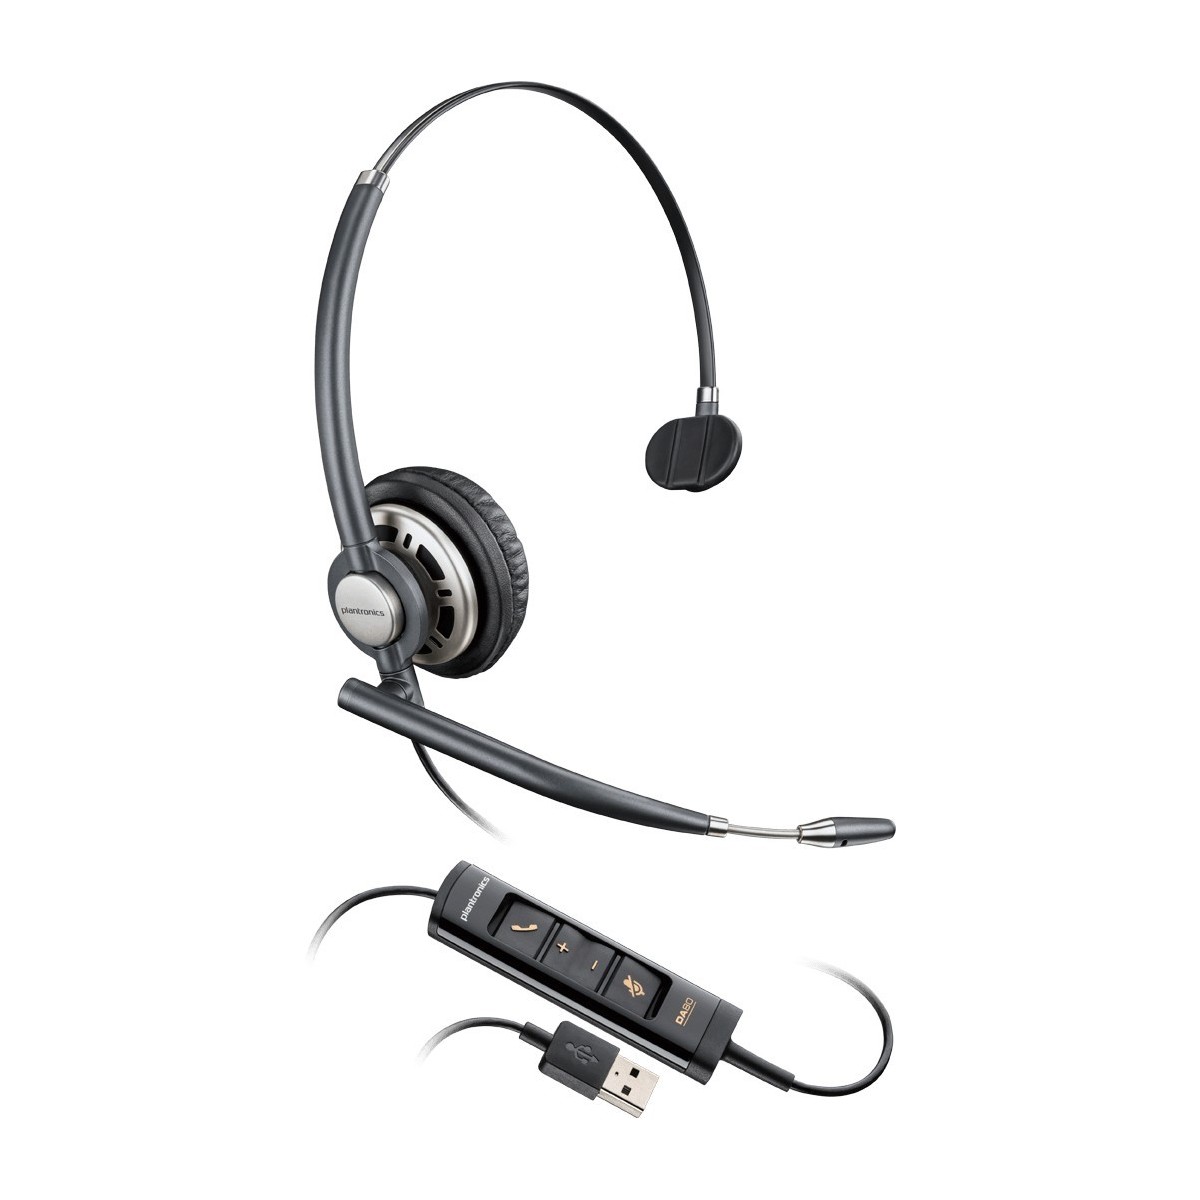 Poly Encorepro HW715 - Headset - Head-band - Office/Call center - Black,Silver - Monaural - In-line control unit